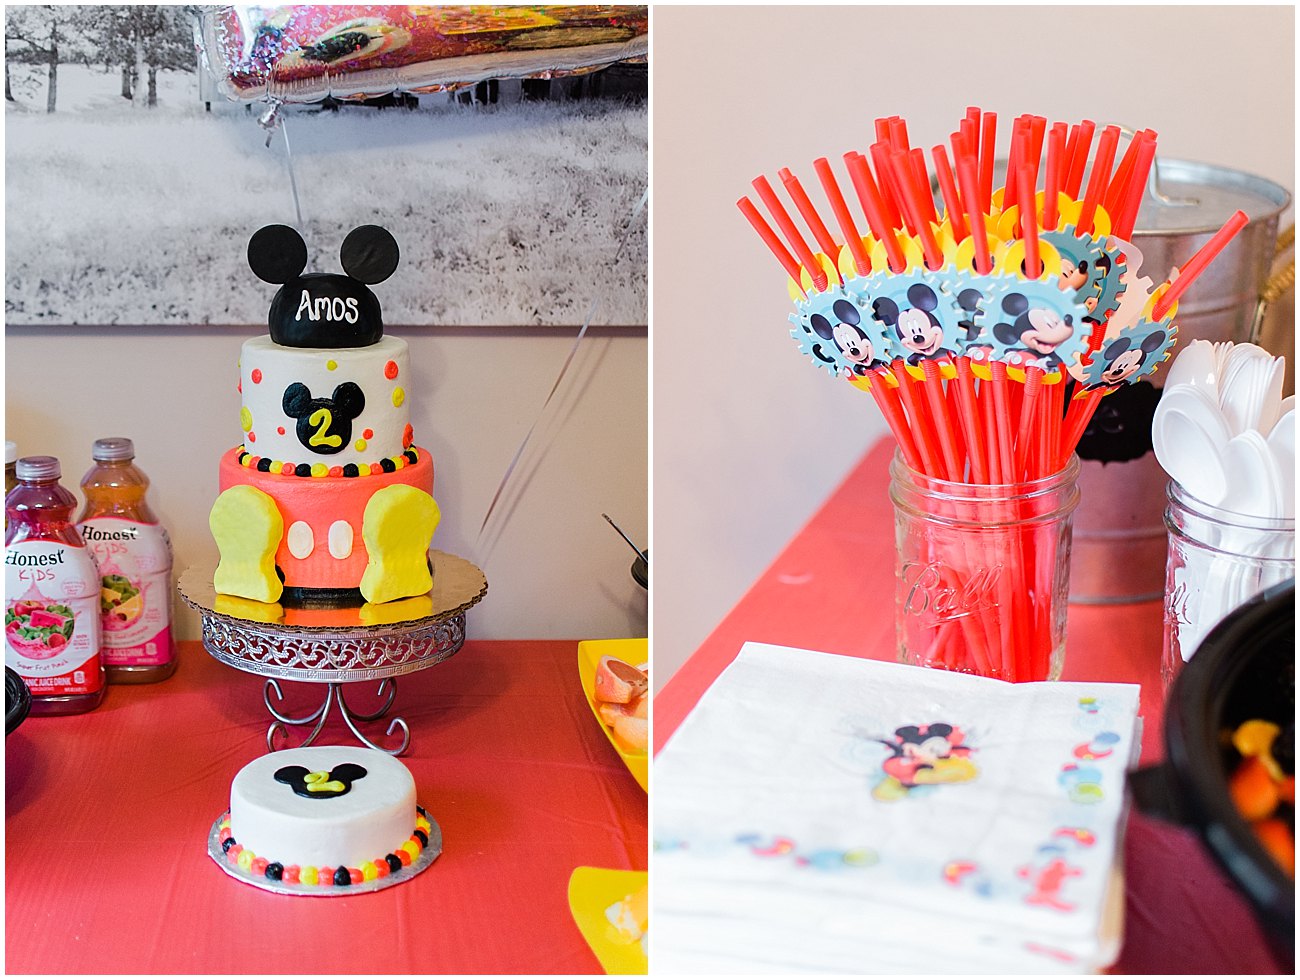 Amos's Mickey Mouse "Oh Two-dles" Birthday Party (7) - Mickey Mouse Birthday Party by popular North Carolina lifestyle blogger Still Being Molly